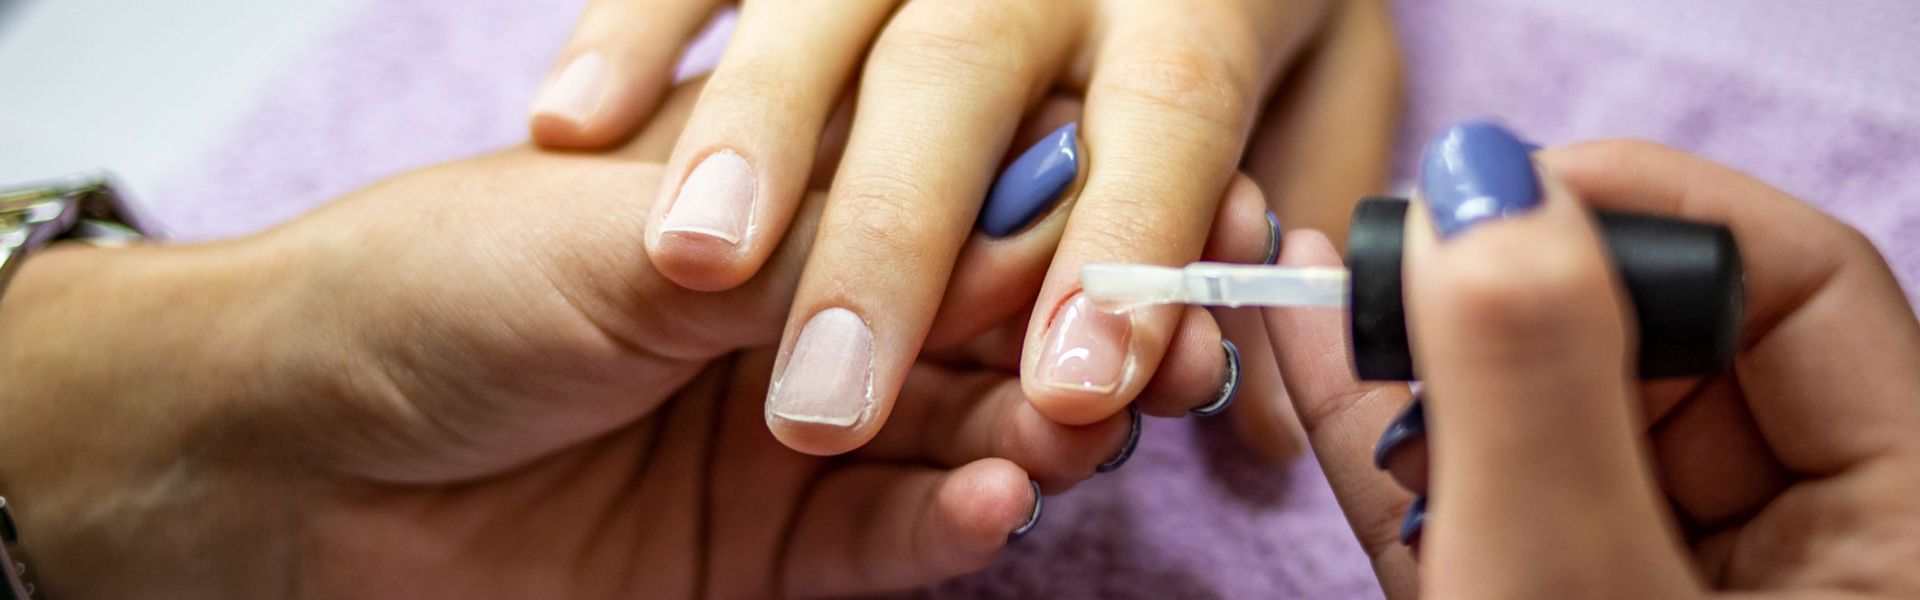 How to use the plastic that comes with the nail that is used instead of glue  - Quora